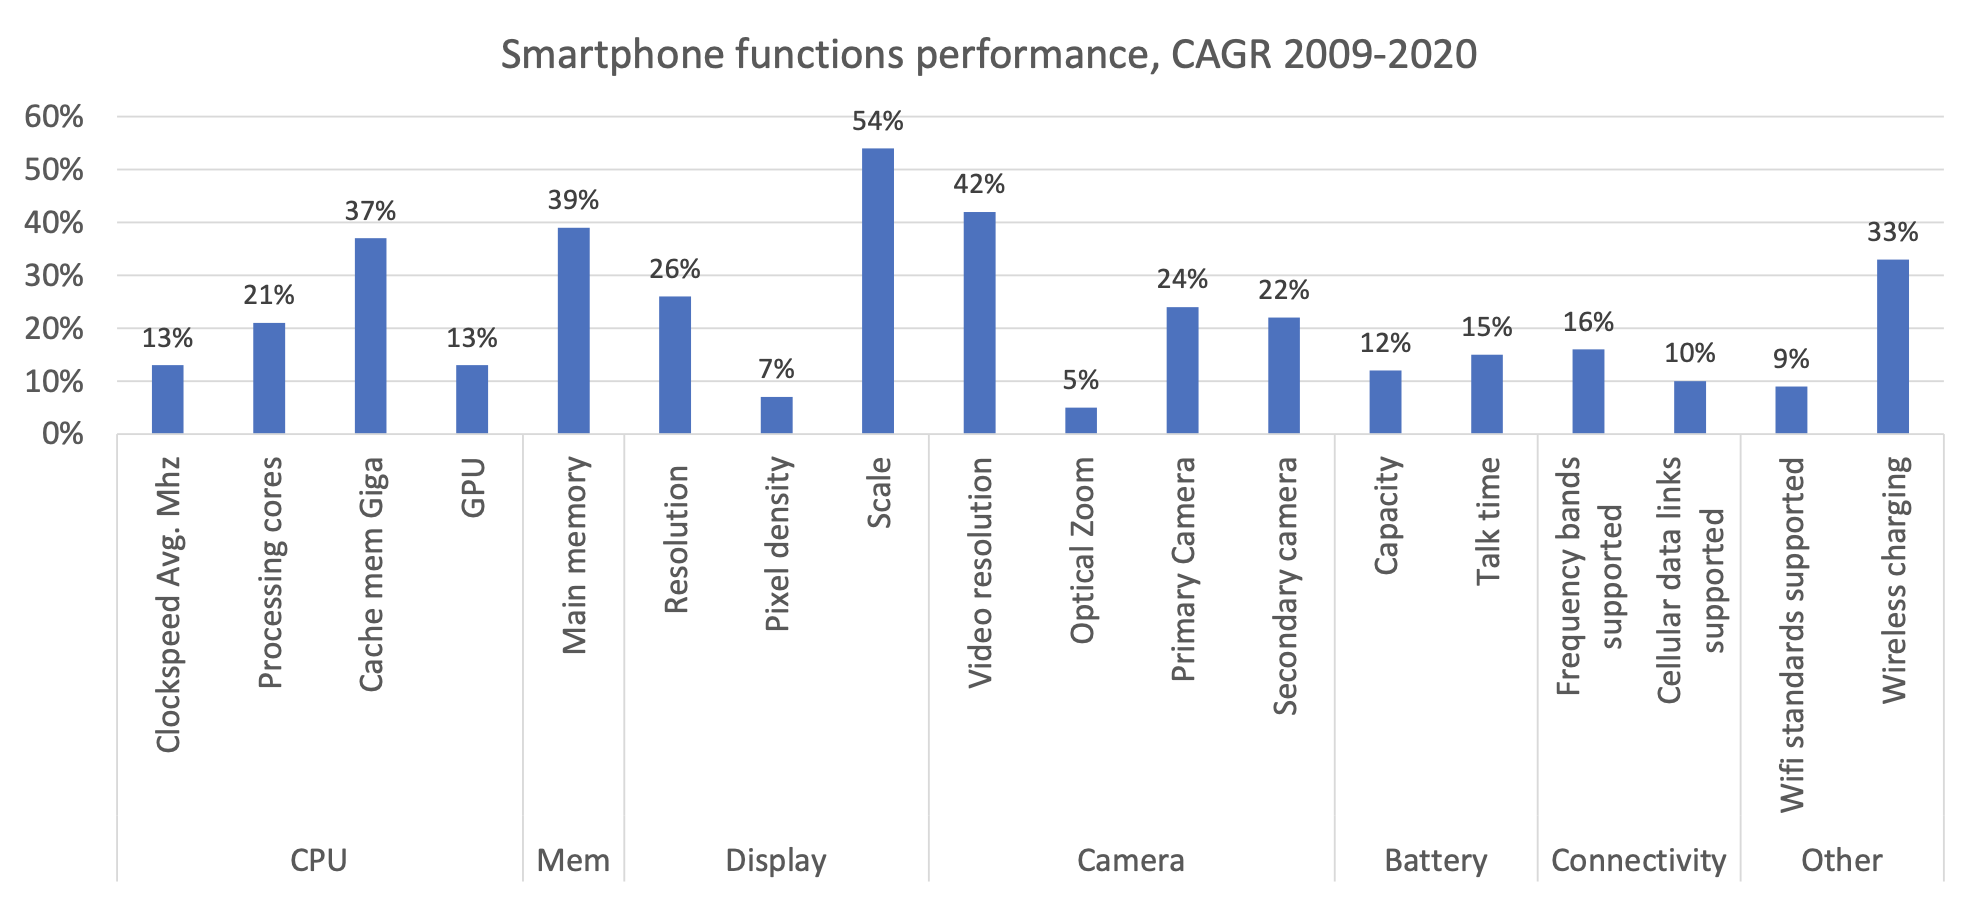 Figure 2 Mobile handset performance and functional improvements, 2009-2020